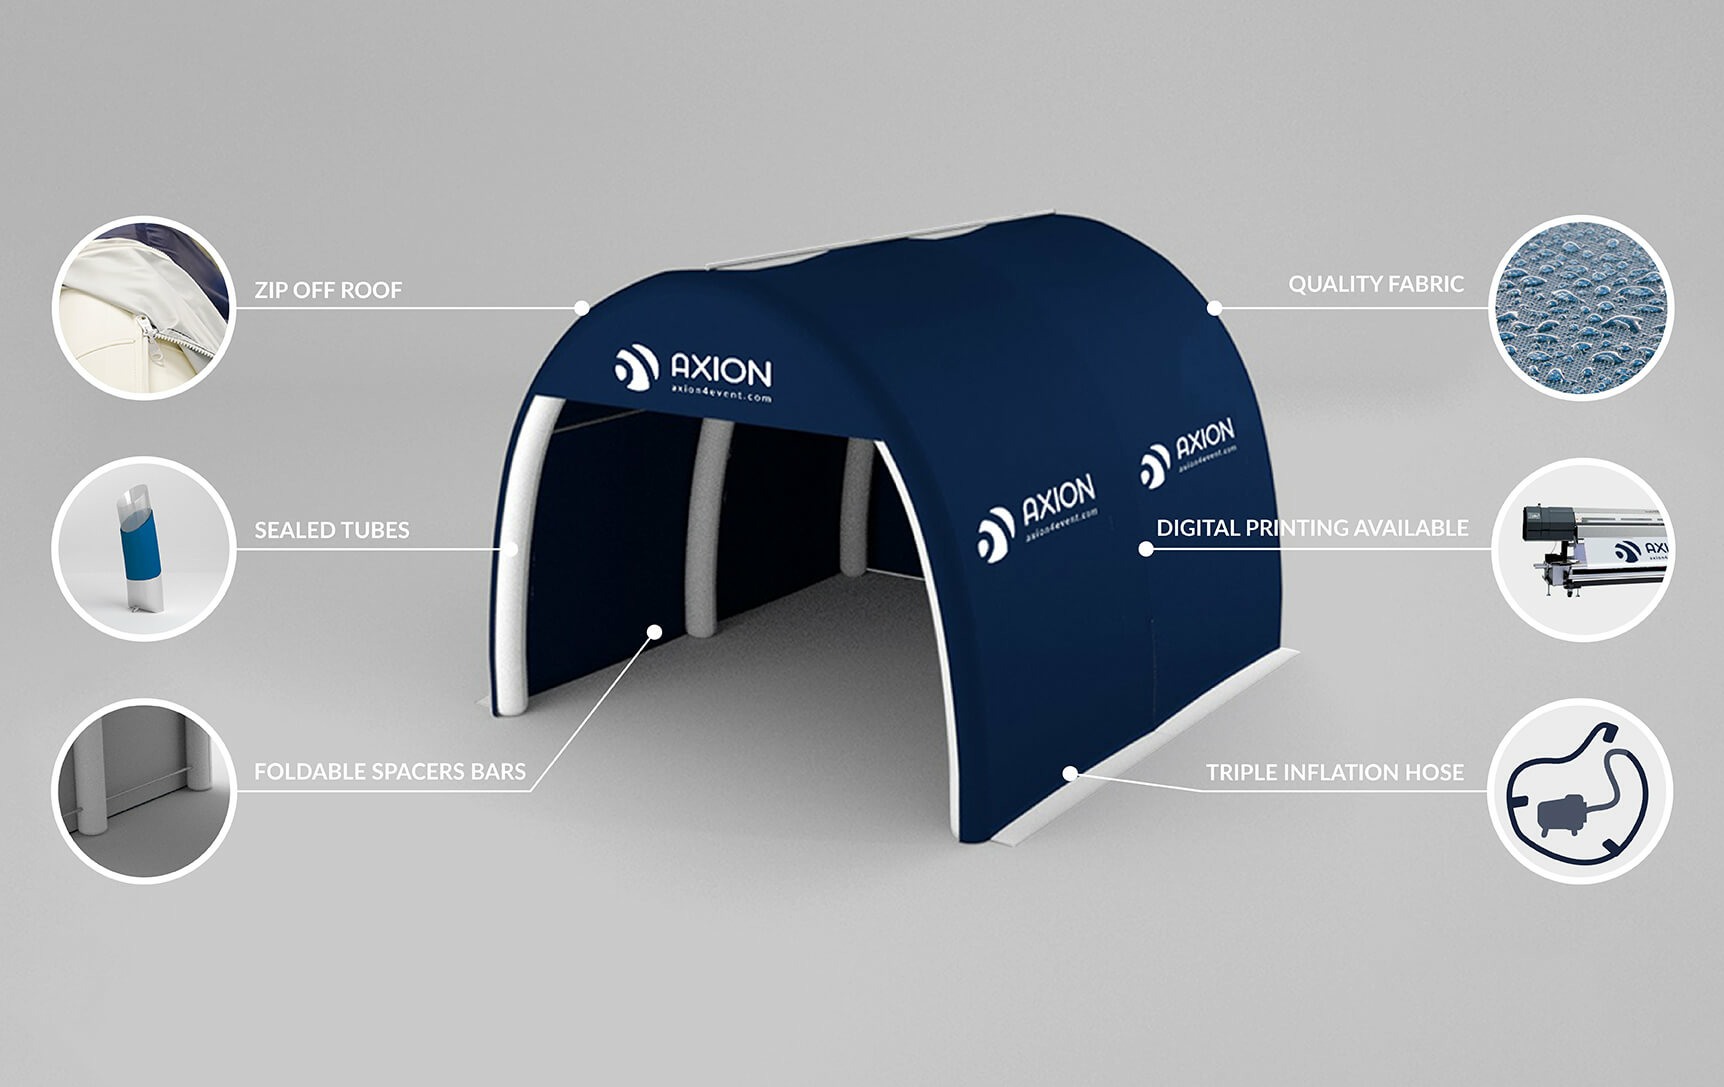 Axion Pod - Inflatable tunnel tent layout and construction details